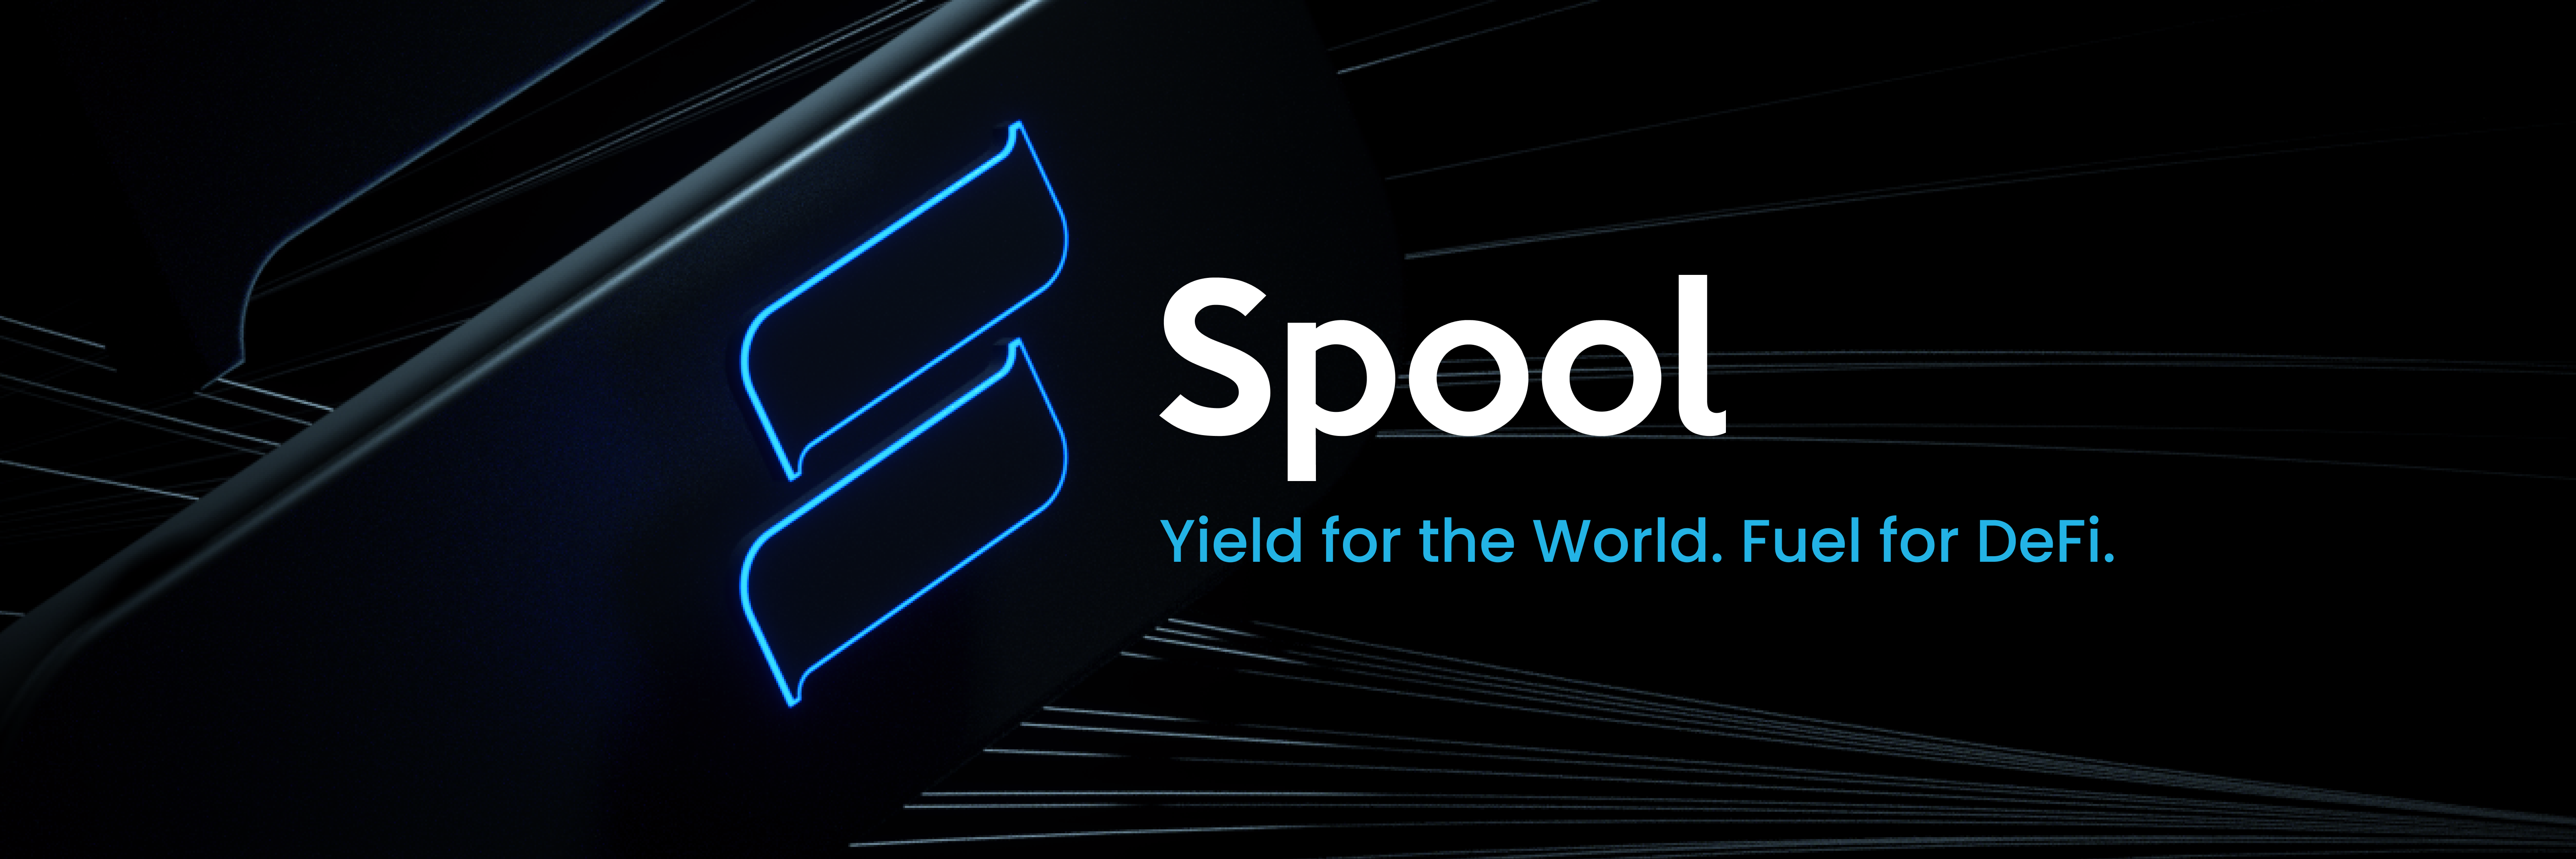 Spool launches its Smart Vault tool to radically simplify risk-managed yield portfolio creation